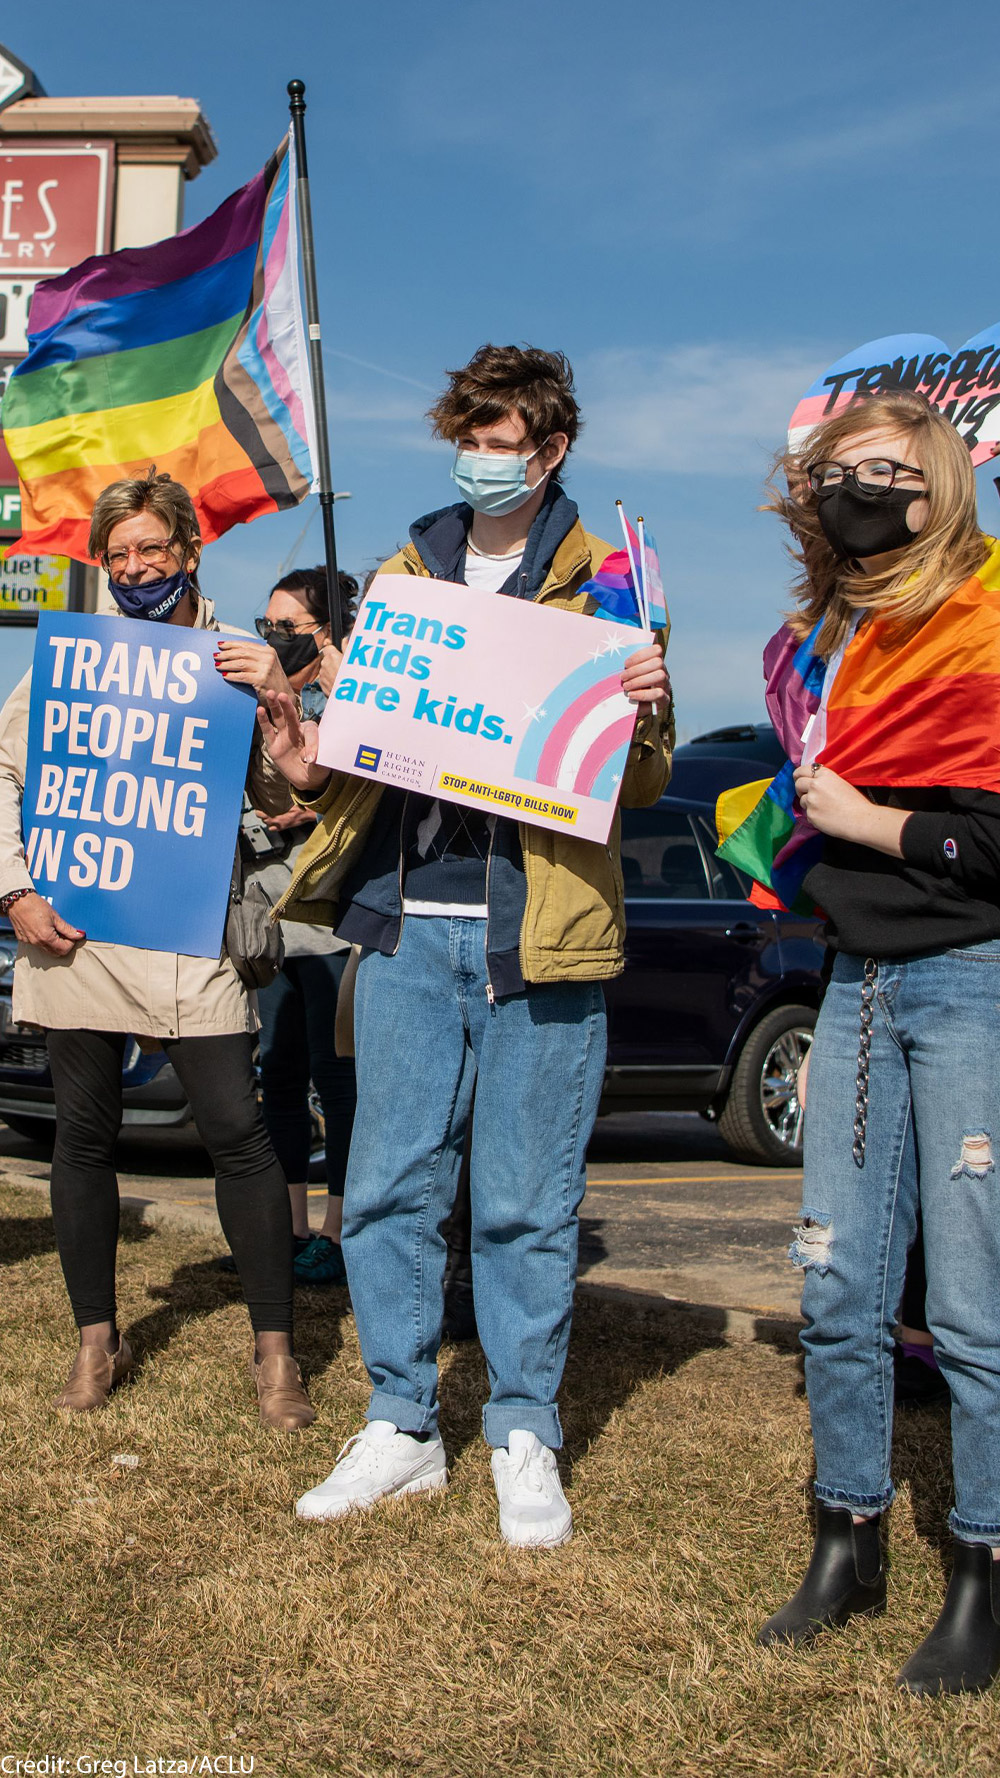 Protestors holding an ACLU "Trans People Belong" poster and "trans kids are kids" poster at a trans rights rally in South Dakota.